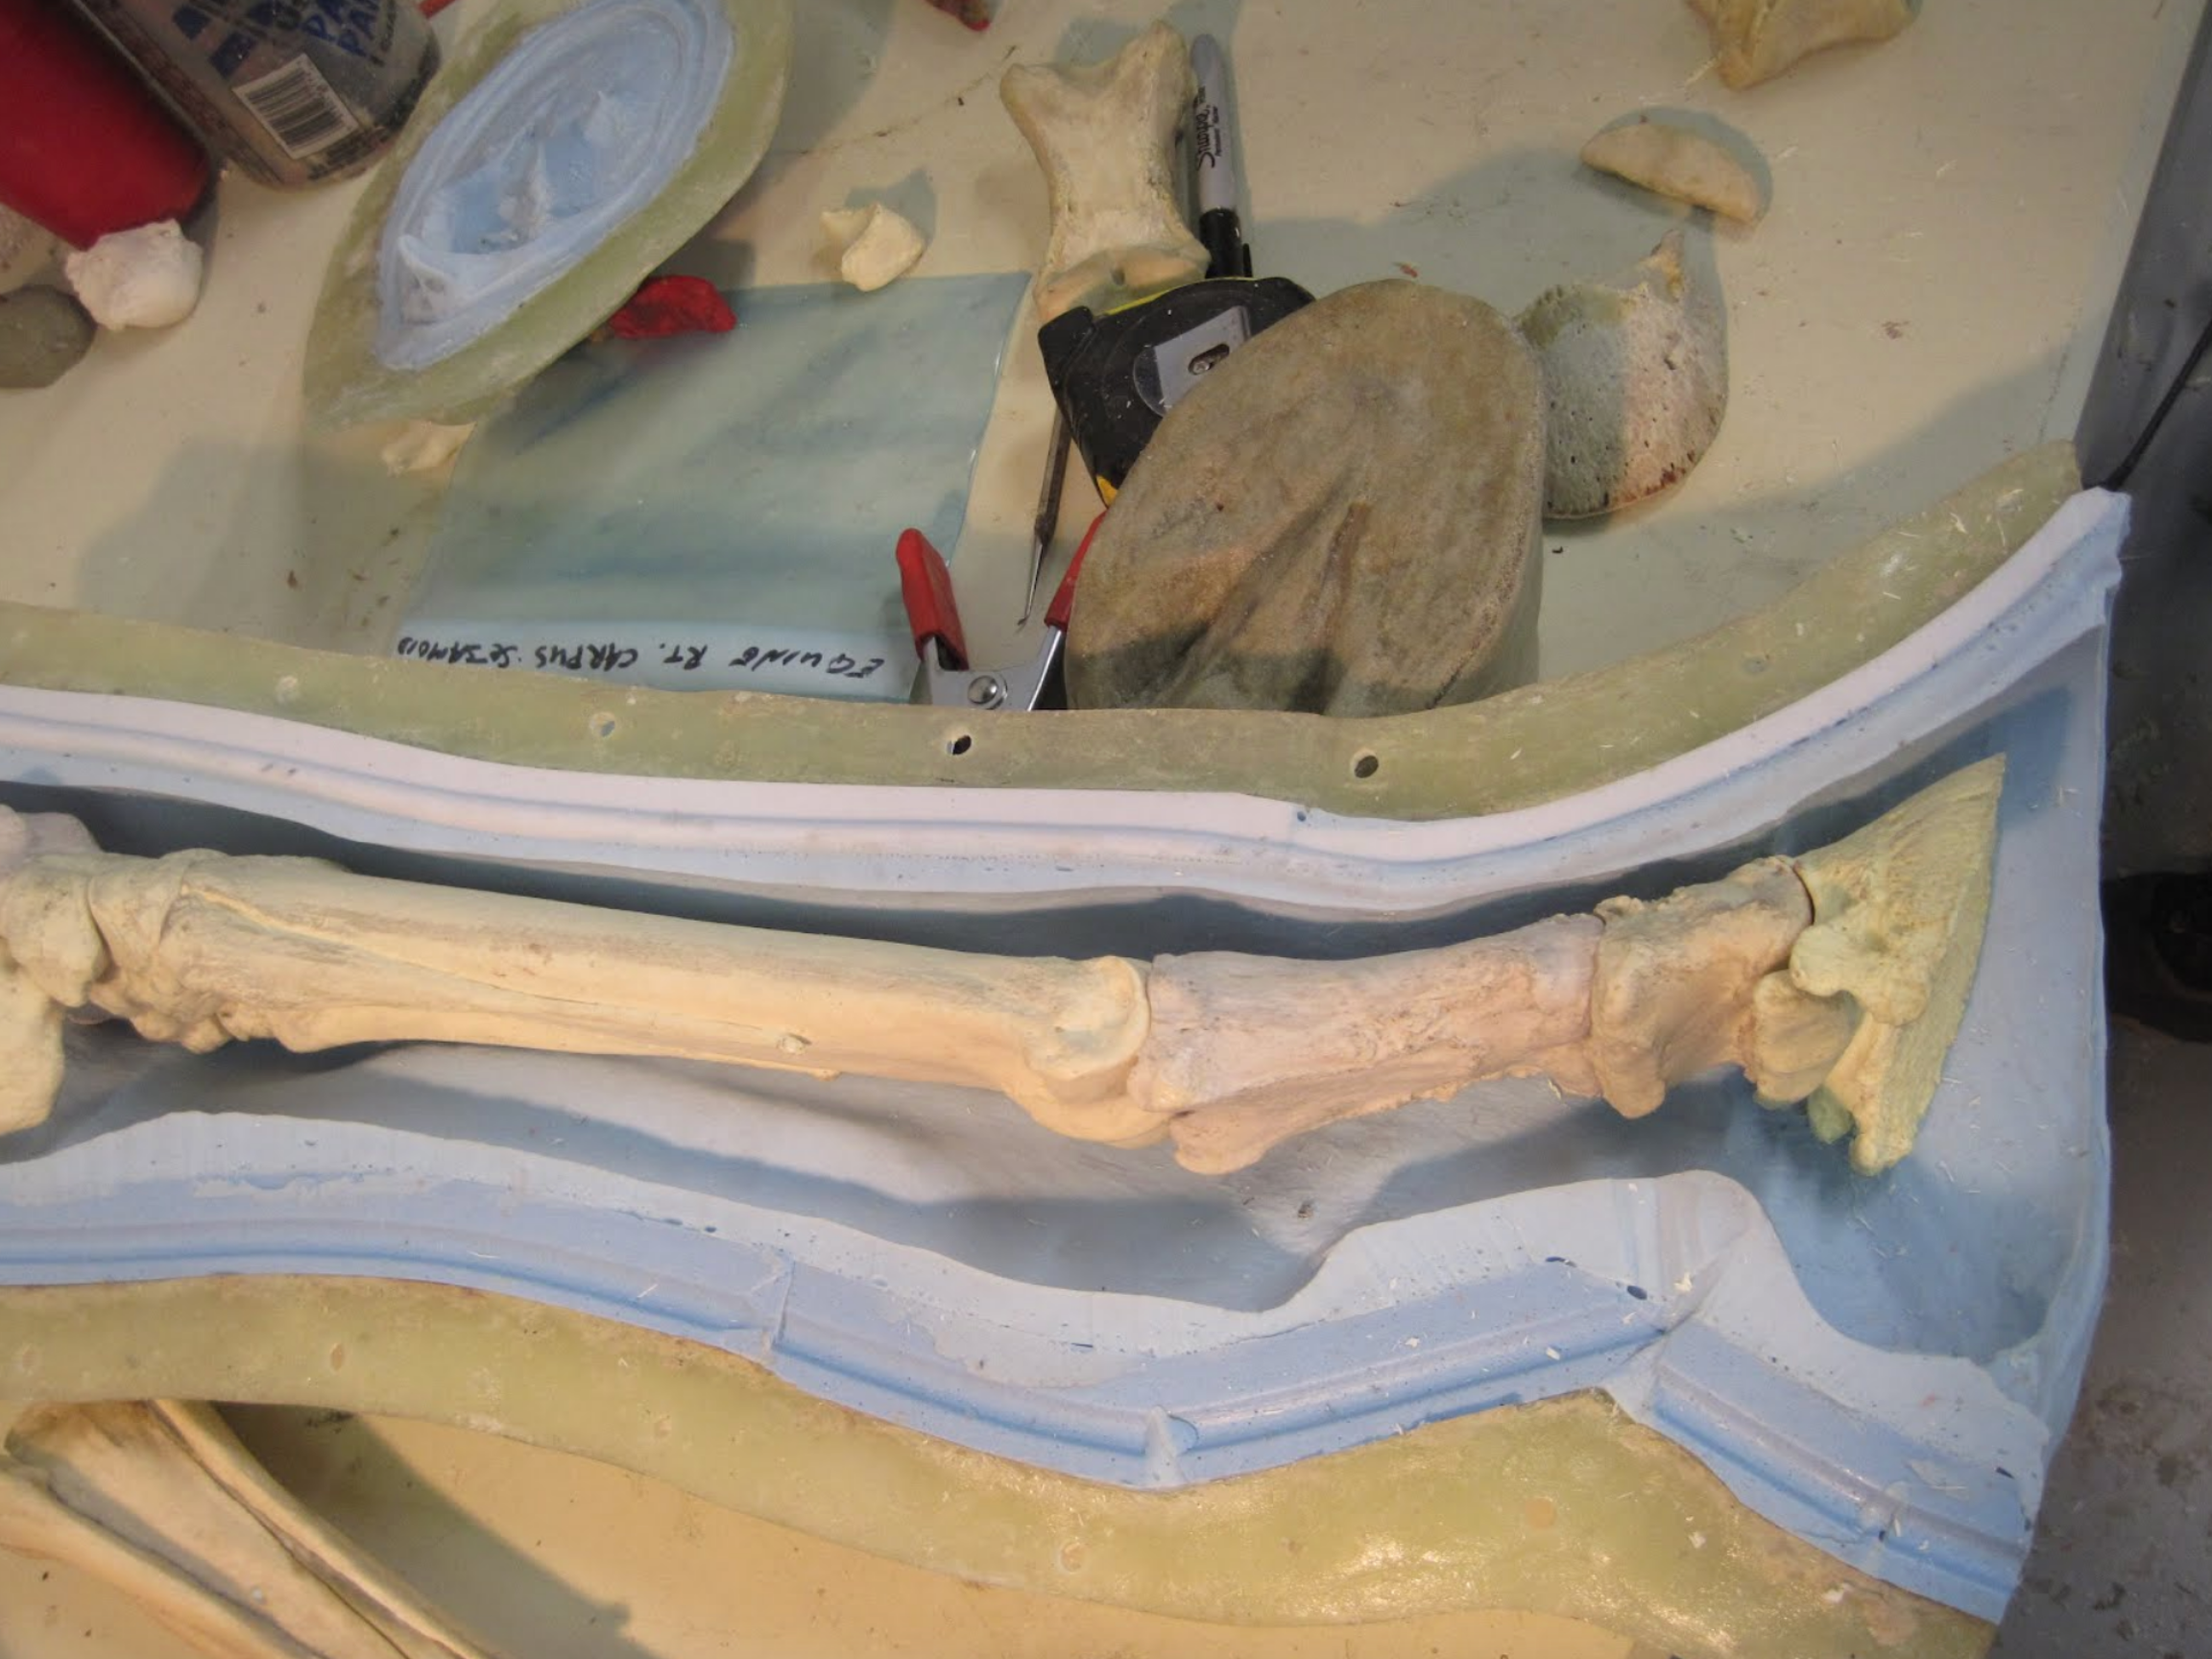  The leg bones have now been cast in a urethane plastic. They have been assembled and attached together to allow the skeletal structure to be registered within the exterior leg mold. This will allow us to begin work on the structures between the skin